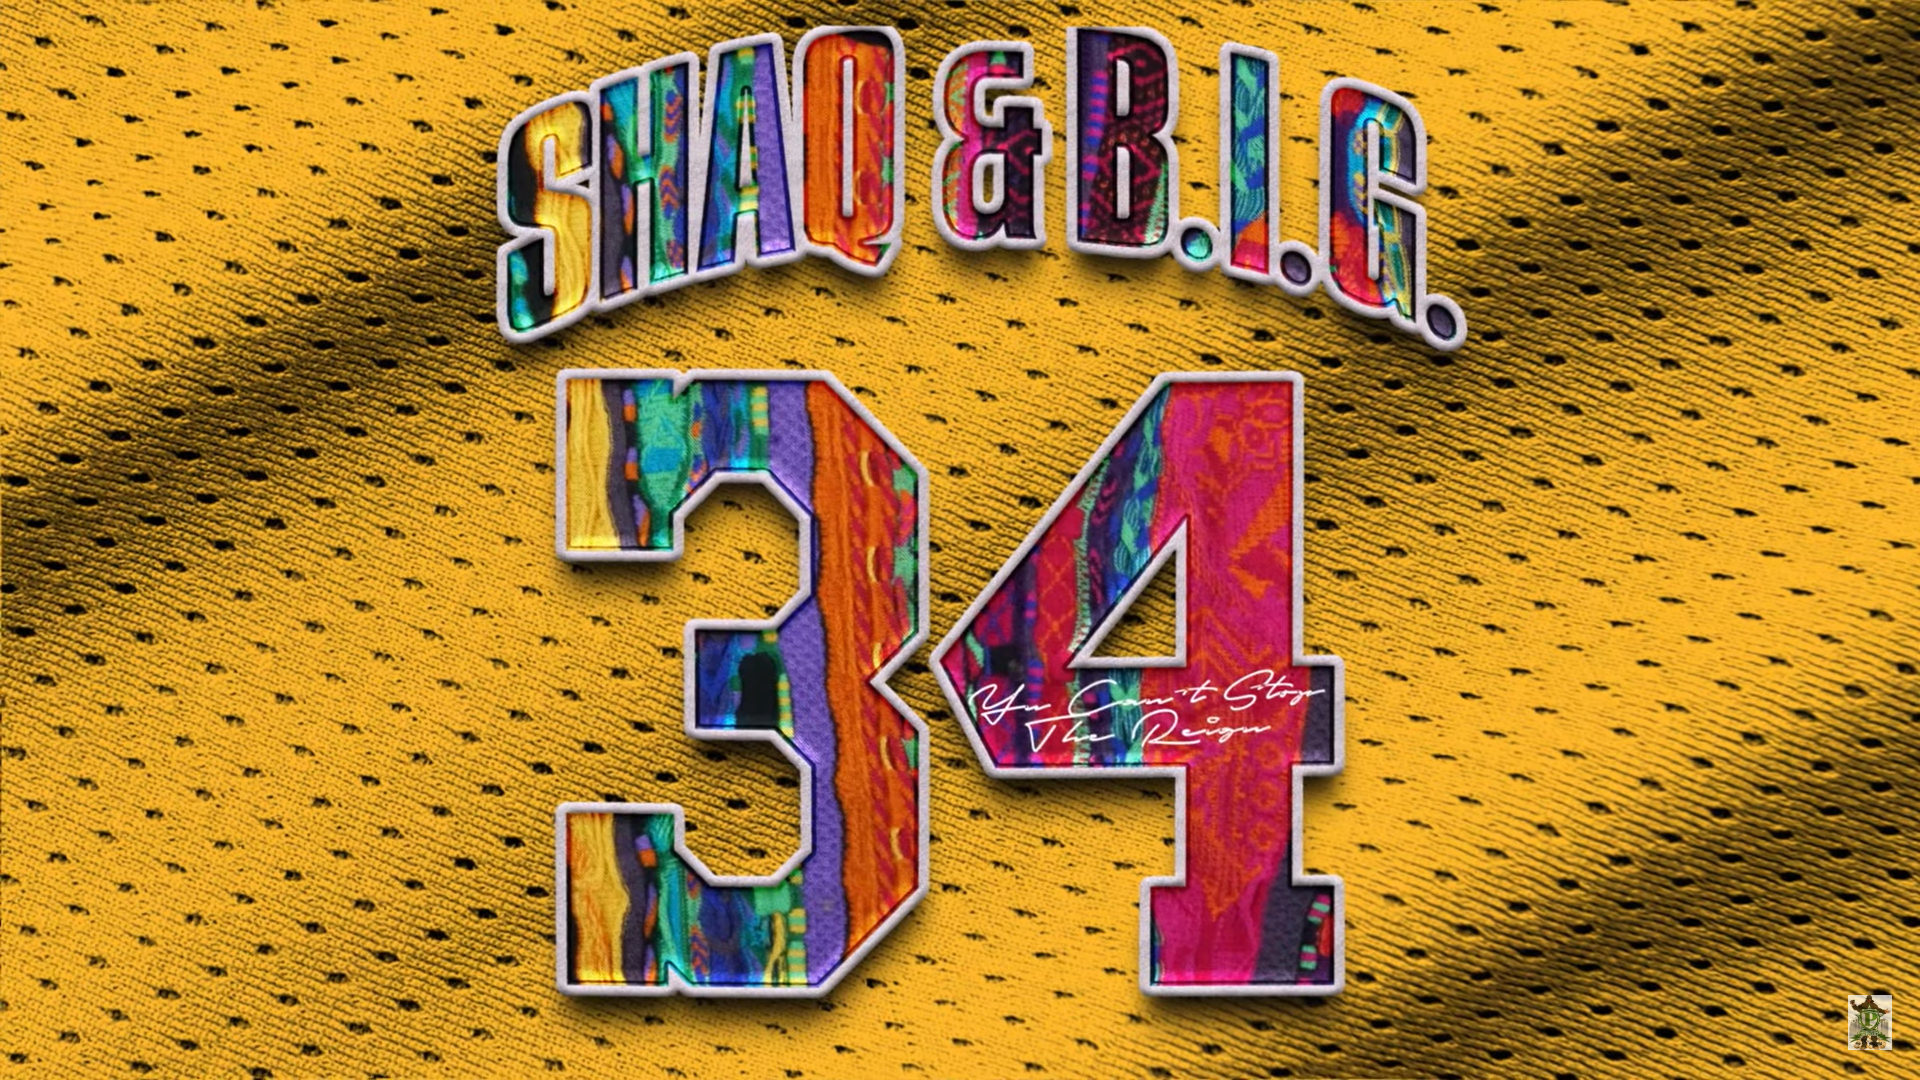 Shaquille O’Neal x The Notorious B.I.G. – You Can’t Stop The Reign